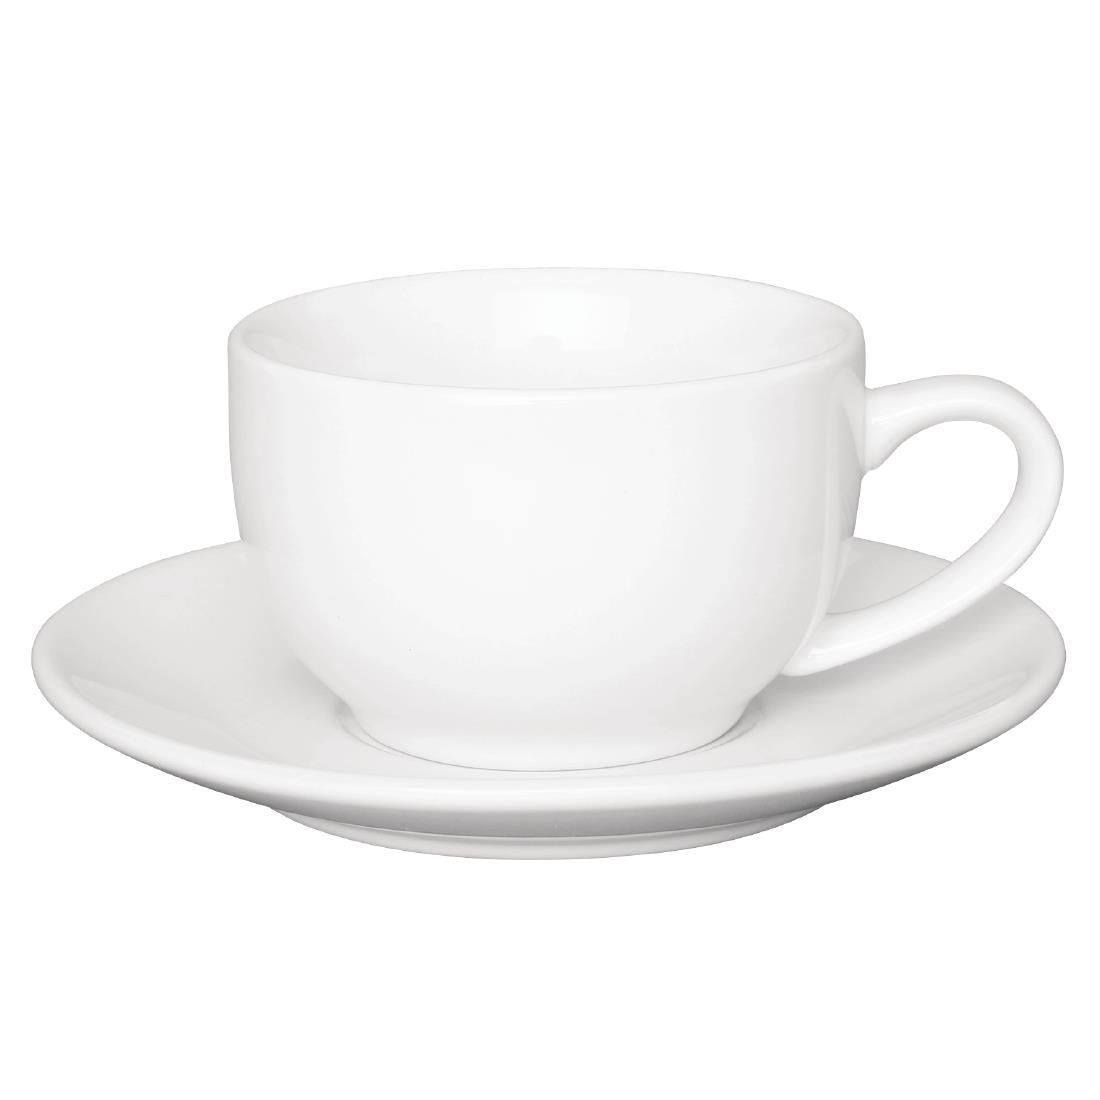 Olympia Cafe Coffee Cups White 228ml (Pack of 12) - GK074  - 3